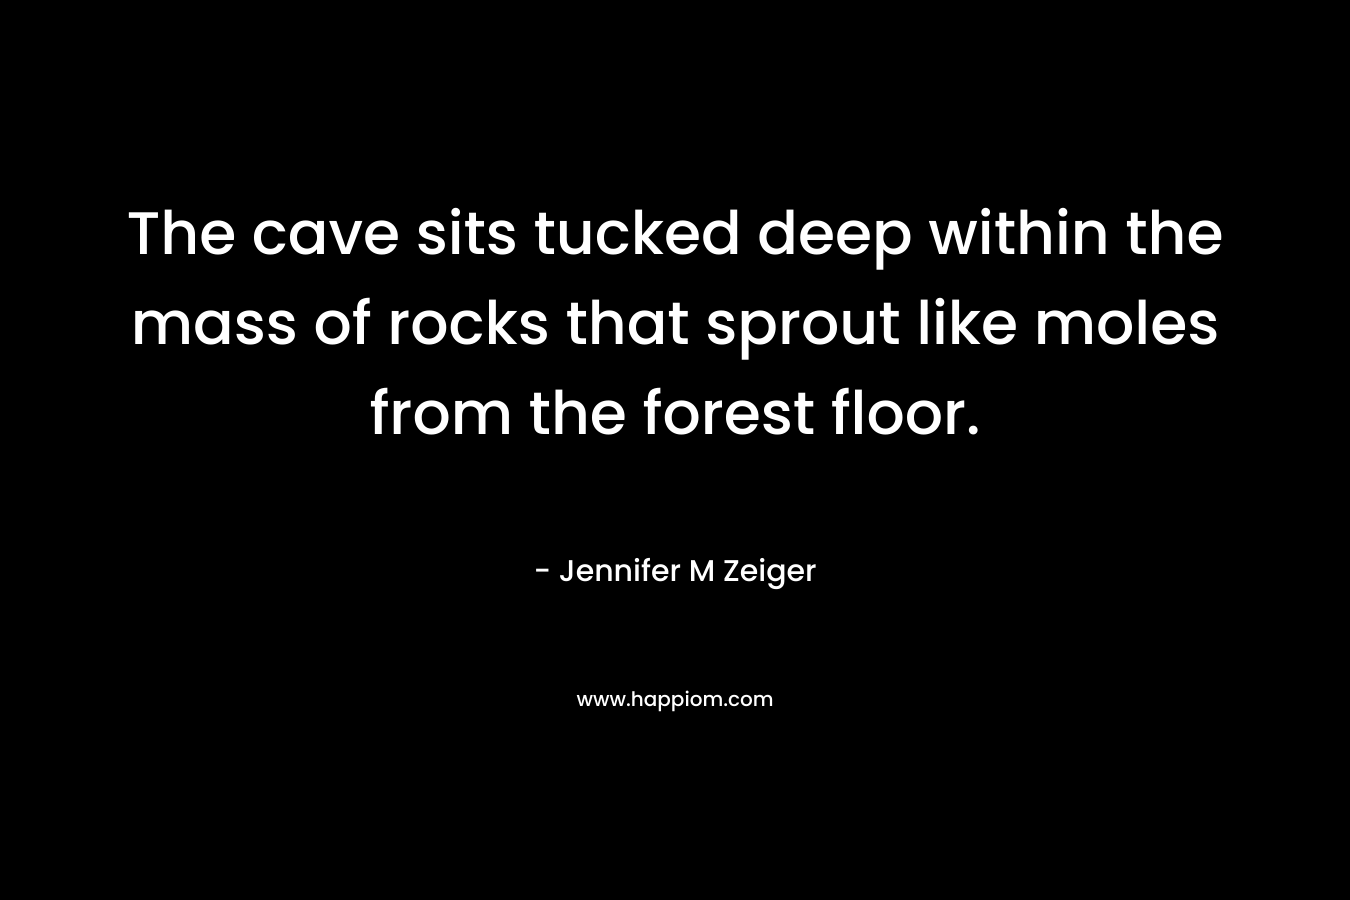 The cave sits tucked deep within the mass of rocks that sprout like moles from the forest floor.